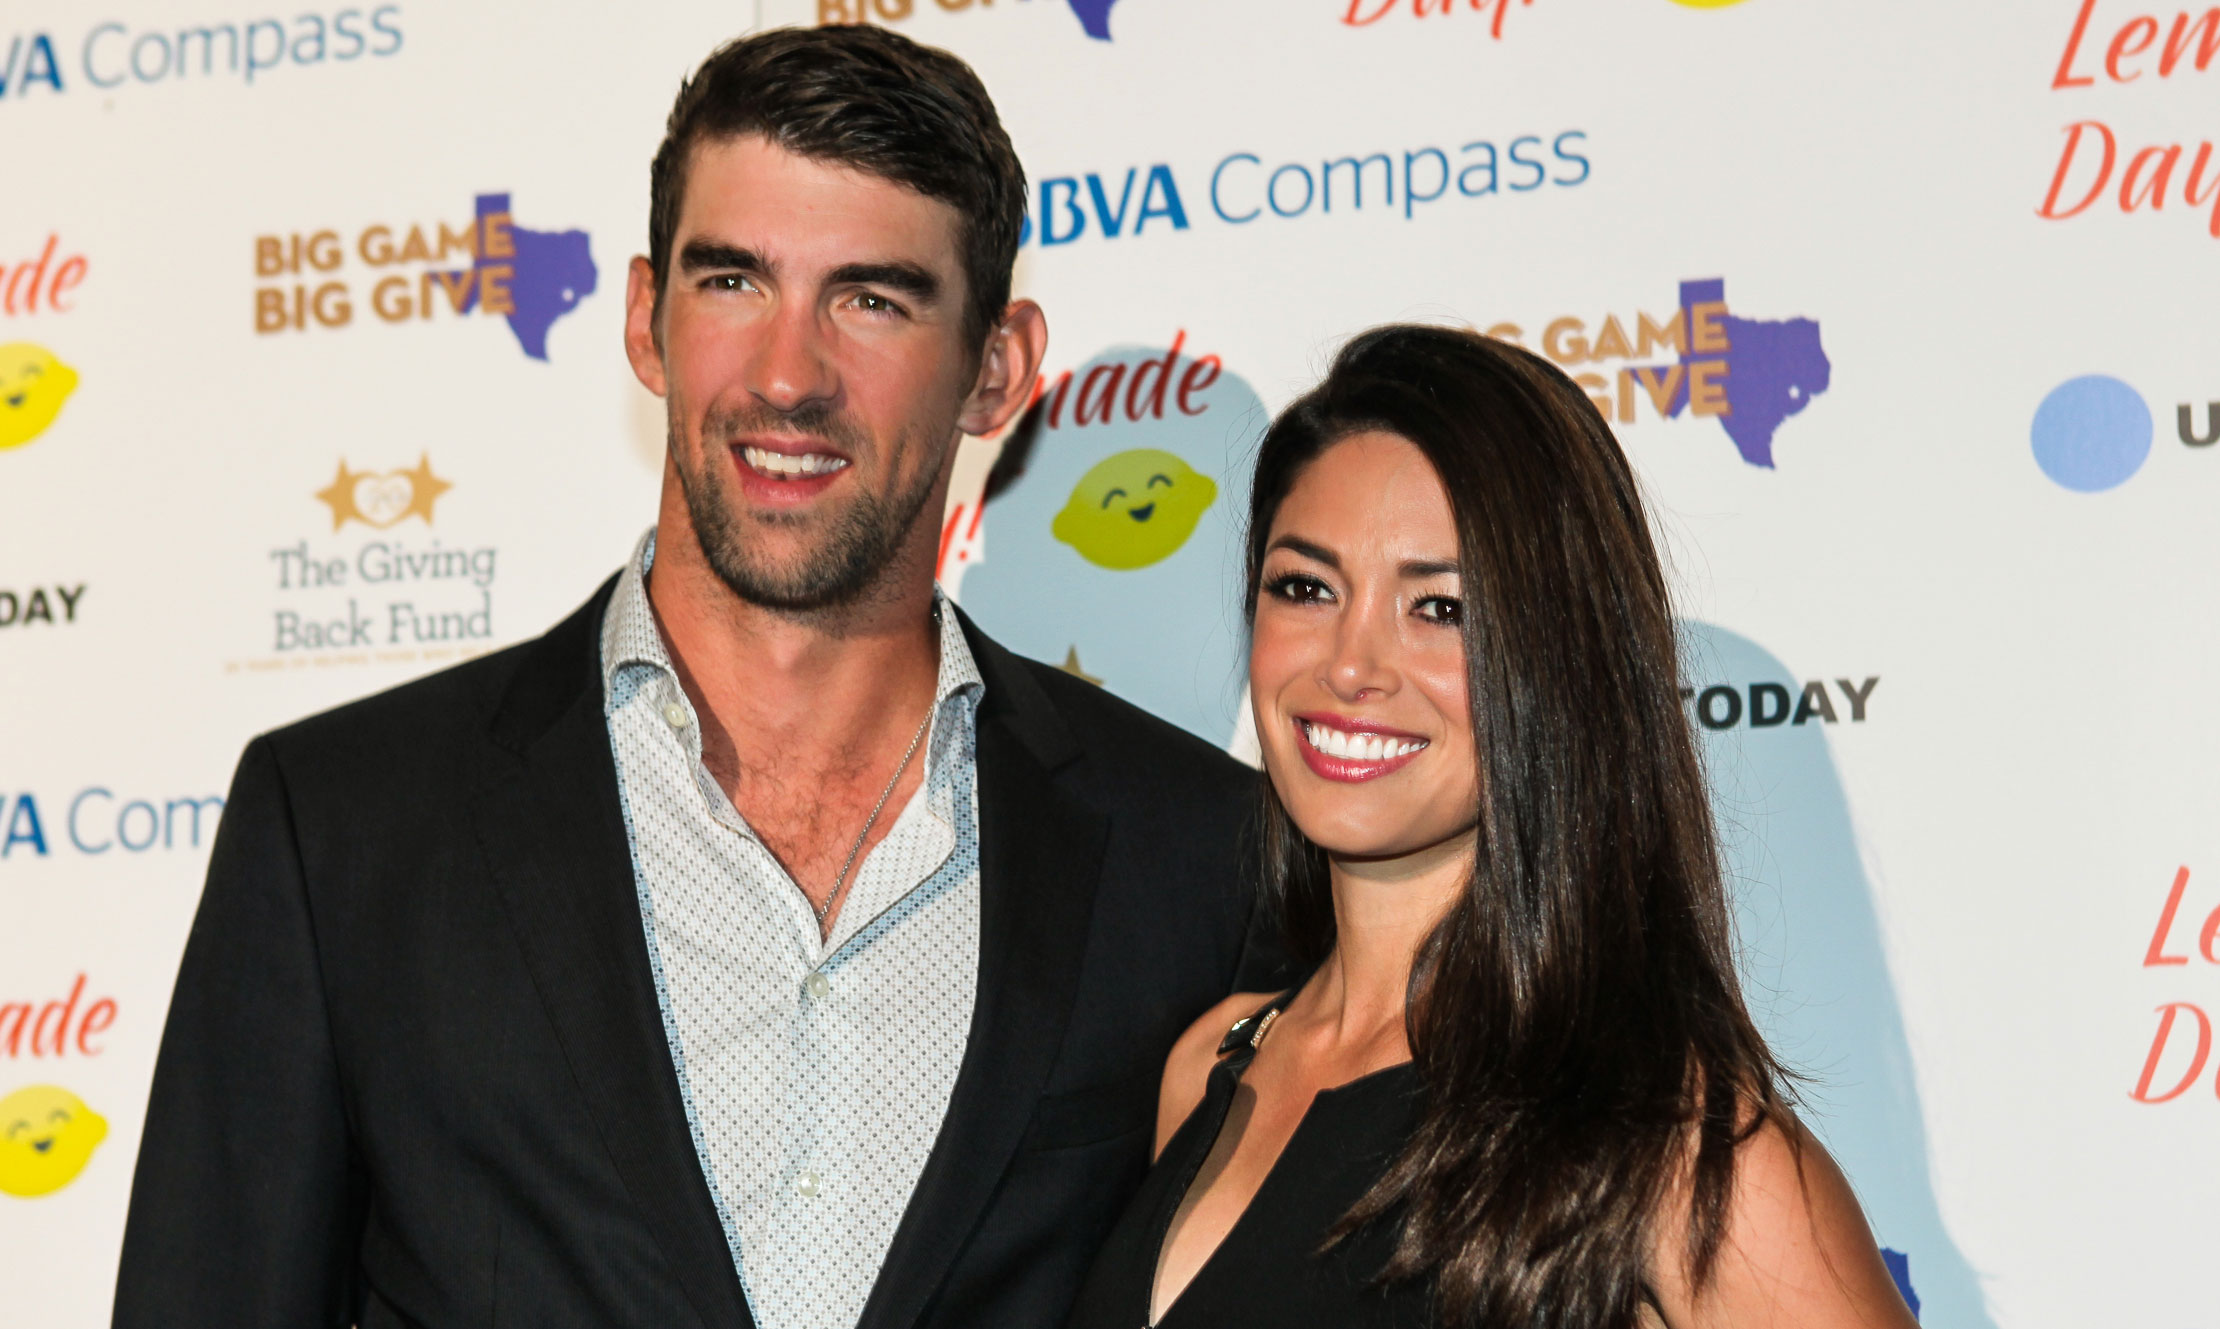 Michael Phelps Reveals Who He's Rooting For in Super Bowl